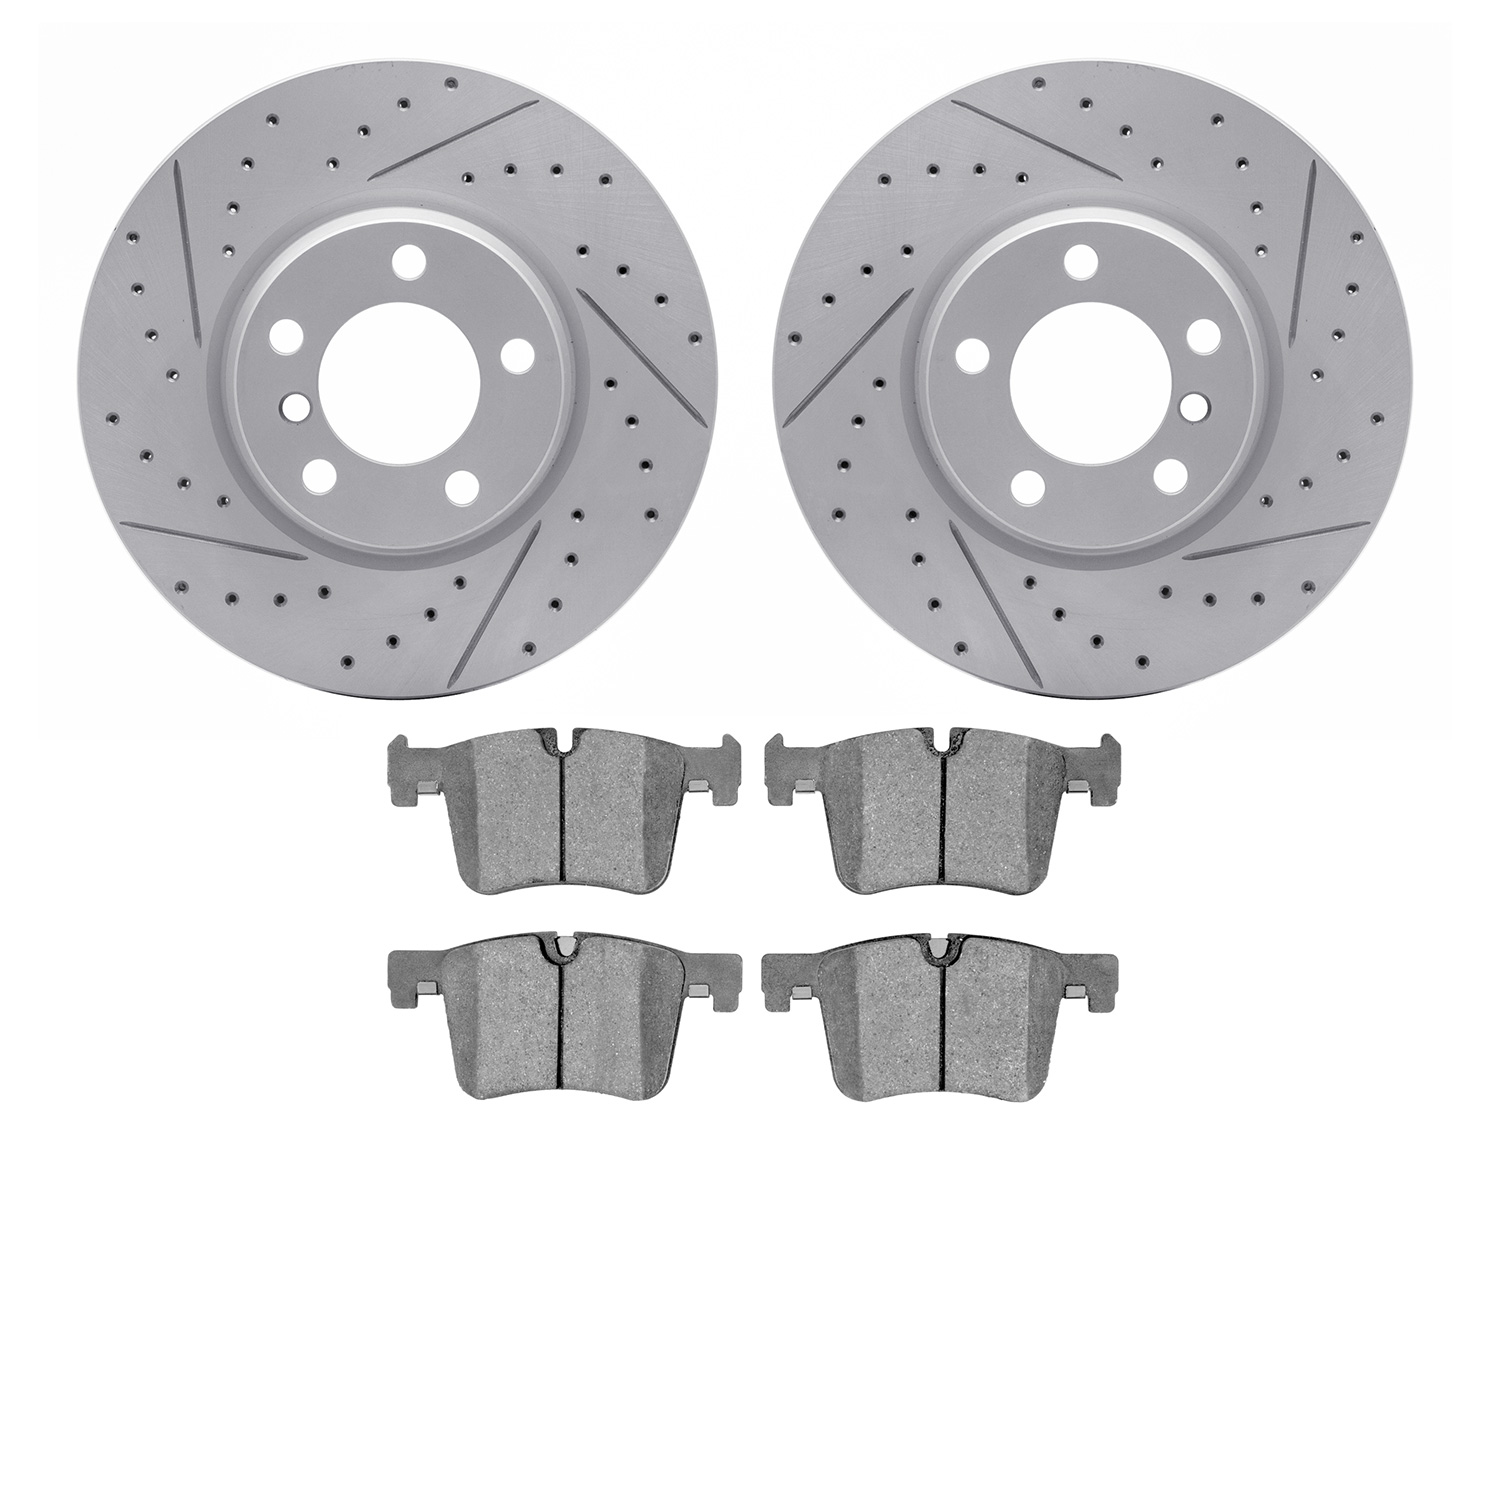 2502-31102 Geoperformance Drilled/Slotted Rotors w/5000 Advanced Brake Pads Kit, 2015-2015 BMW, Position: Front